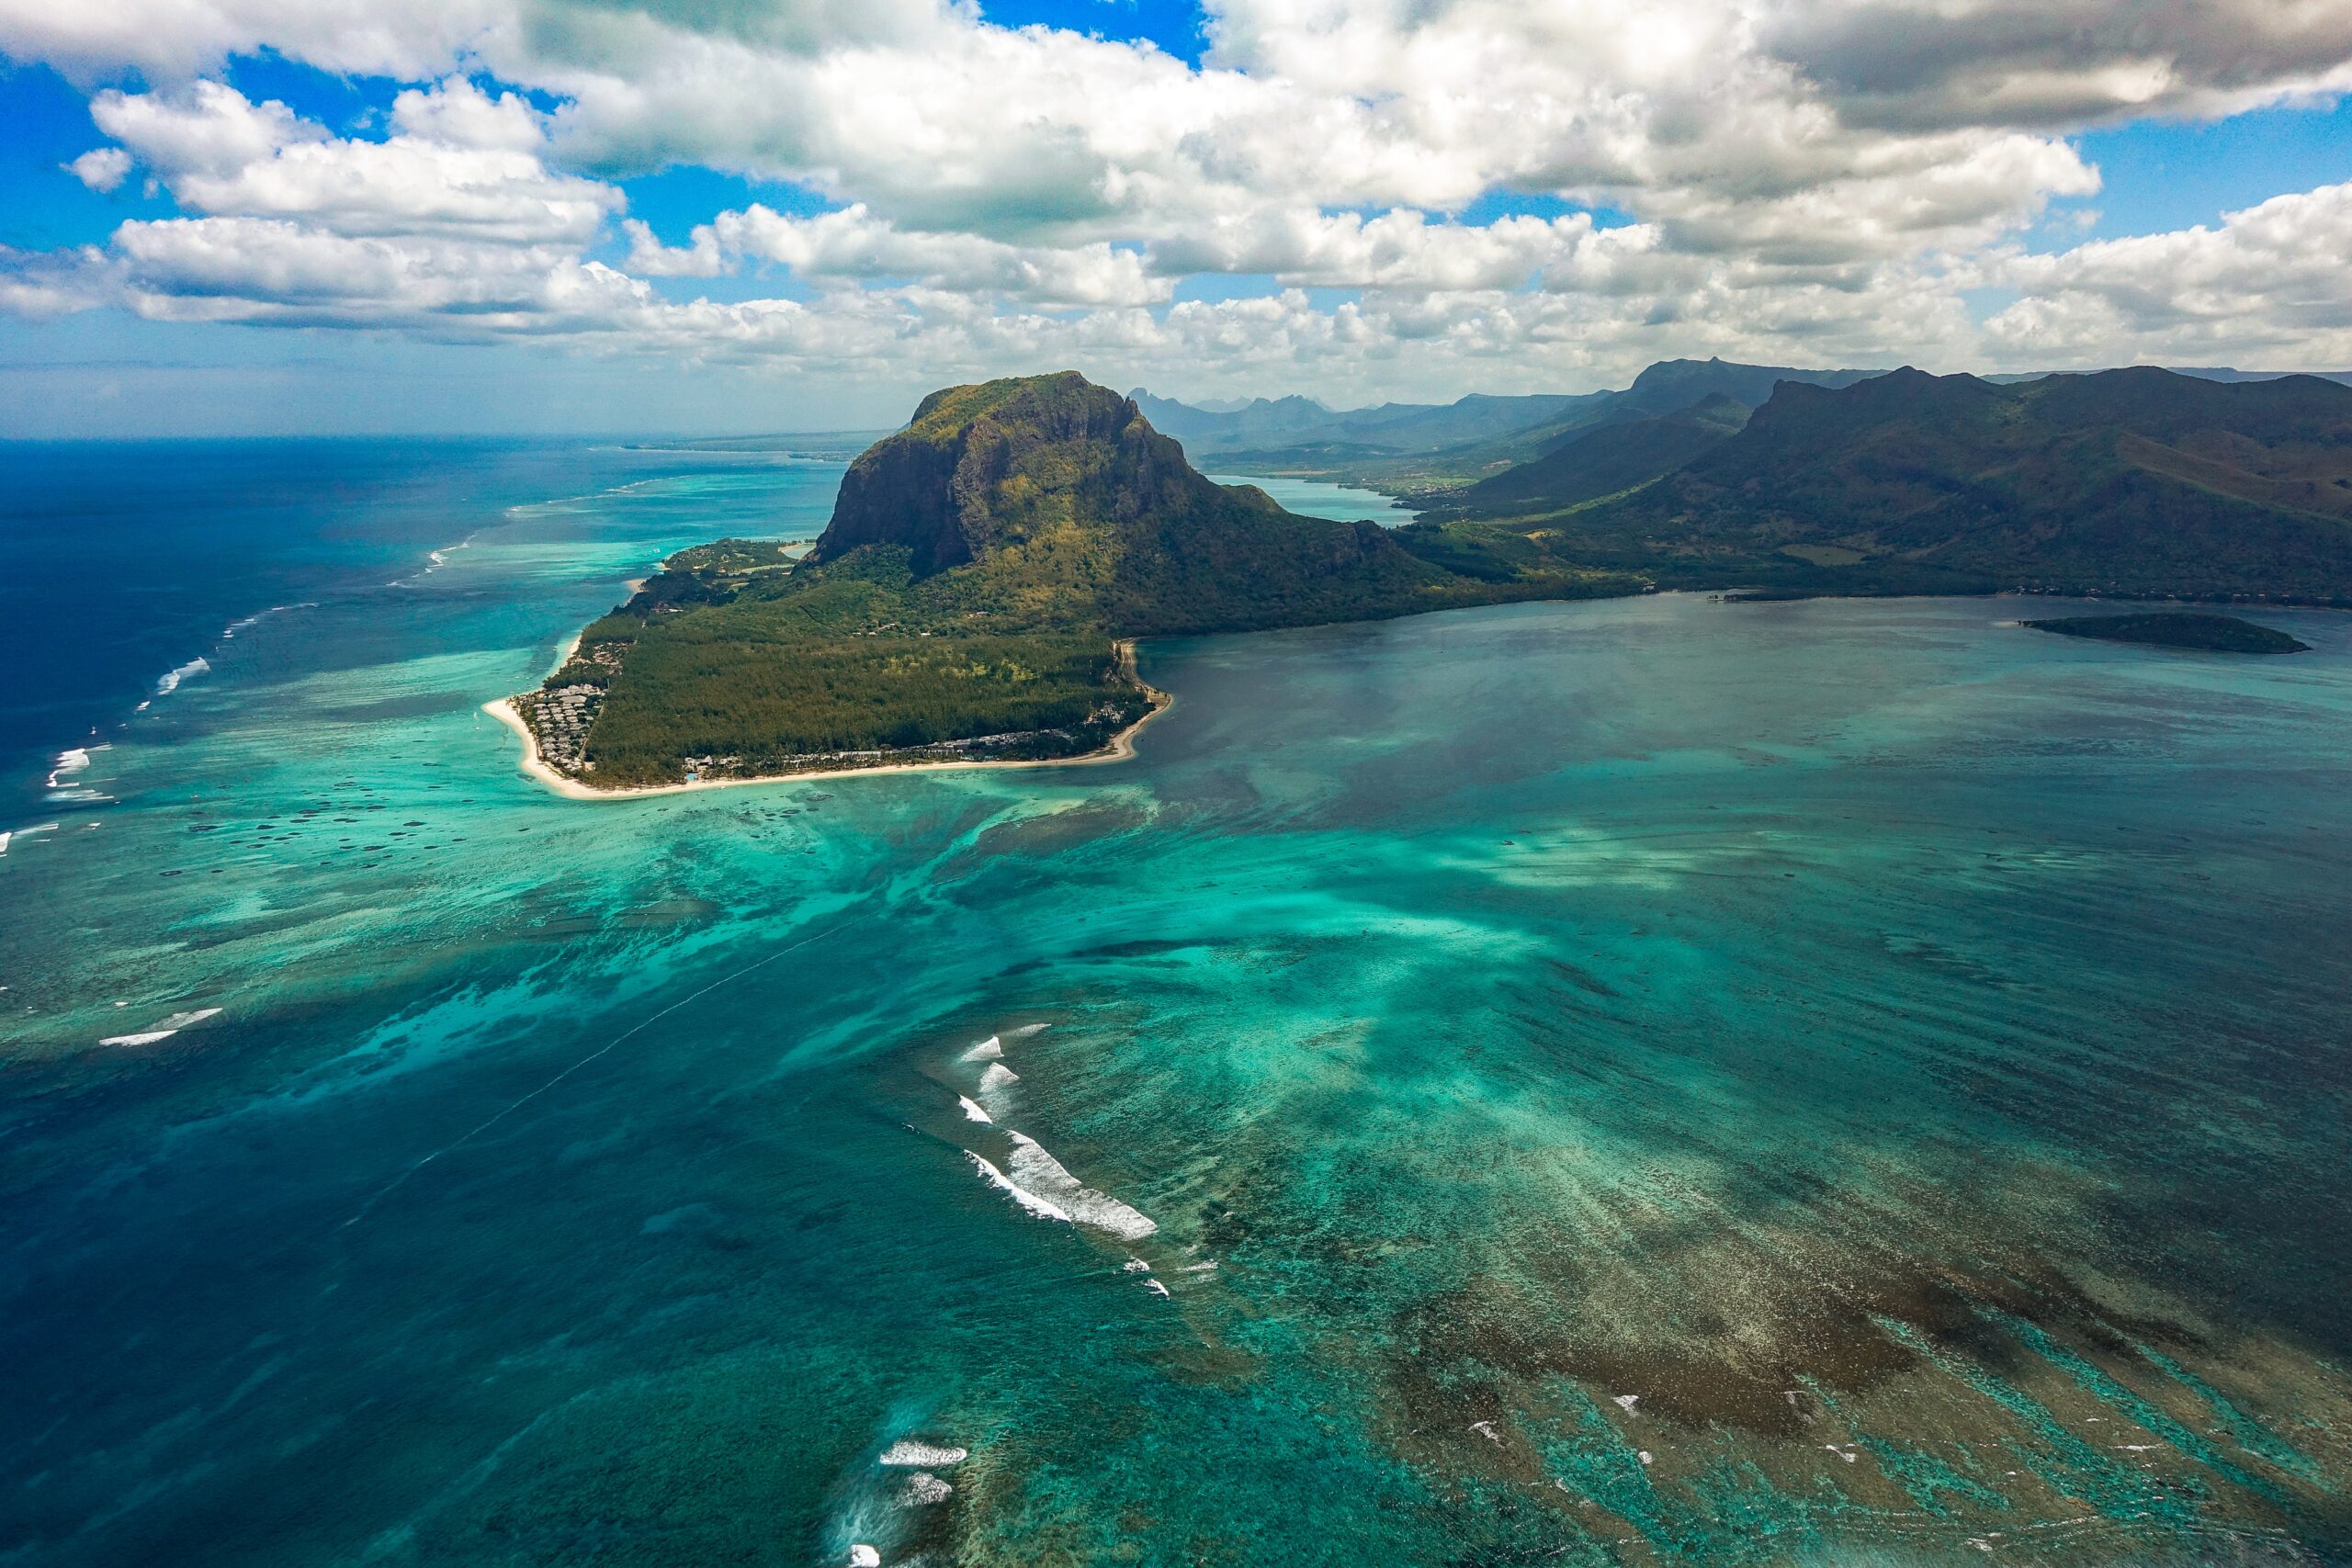 South of Mauritius, Le Morne, showing green and grey mountain peak in front of blue and green lagoon with underwater waterfall illusion